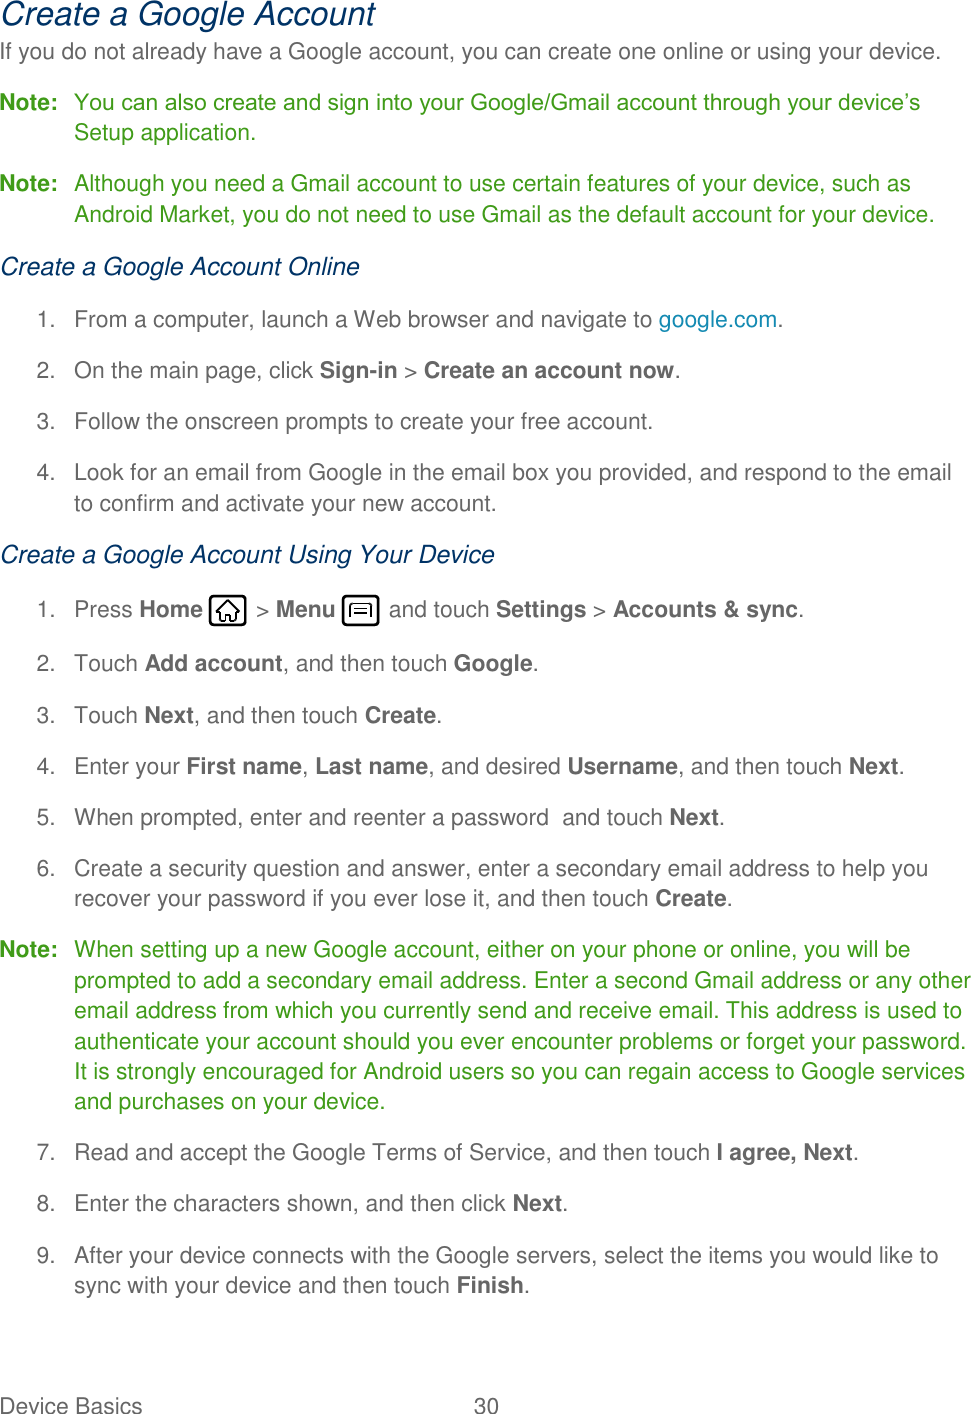 Device Basics  30   Create a Google Account If you do not already have a Google account, you can create one online or using your device. Note: You can also create and sign into your Google/Gmail account through your device’s Setup application. Note:  Although you need a Gmail account to use certain features of your device, such as Android Market, you do not need to use Gmail as the default account for your device. Create a Google Account Online 1.  From a computer, launch a Web browser and navigate to google.com. 2.  On the main page, click Sign-in &gt; Create an account now. 3.  Follow the onscreen prompts to create your free account. 4.  Look for an email from Google in the email box you provided, and respond to the email to confirm and activate your new account. Create a Google Account Using Your Device 1.  Press Home   &gt; Menu   and touch Settings &gt; Accounts &amp; sync. 2.  Touch Add account, and then touch Google.  3.  Touch Next, and then touch Create. 4.  Enter your First name, Last name, and desired Username, and then touch Next.  5.  When prompted, enter and reenter a password  and touch Next. 6.  Create a security question and answer, enter a secondary email address to help you recover your password if you ever lose it, and then touch Create.  Note:  When setting up a new Google account, either on your phone or online, you will be prompted to add a secondary email address. Enter a second Gmail address or any other email address from which you currently send and receive email. This address is used to authenticate your account should you ever encounter problems or forget your password. It is strongly encouraged for Android users so you can regain access to Google services and purchases on your device. 7.  Read and accept the Google Terms of Service, and then touch I agree, Next.  8.  Enter the characters shown, and then click Next. 9.  After your device connects with the Google servers, select the items you would like to sync with your device and then touch Finish. 